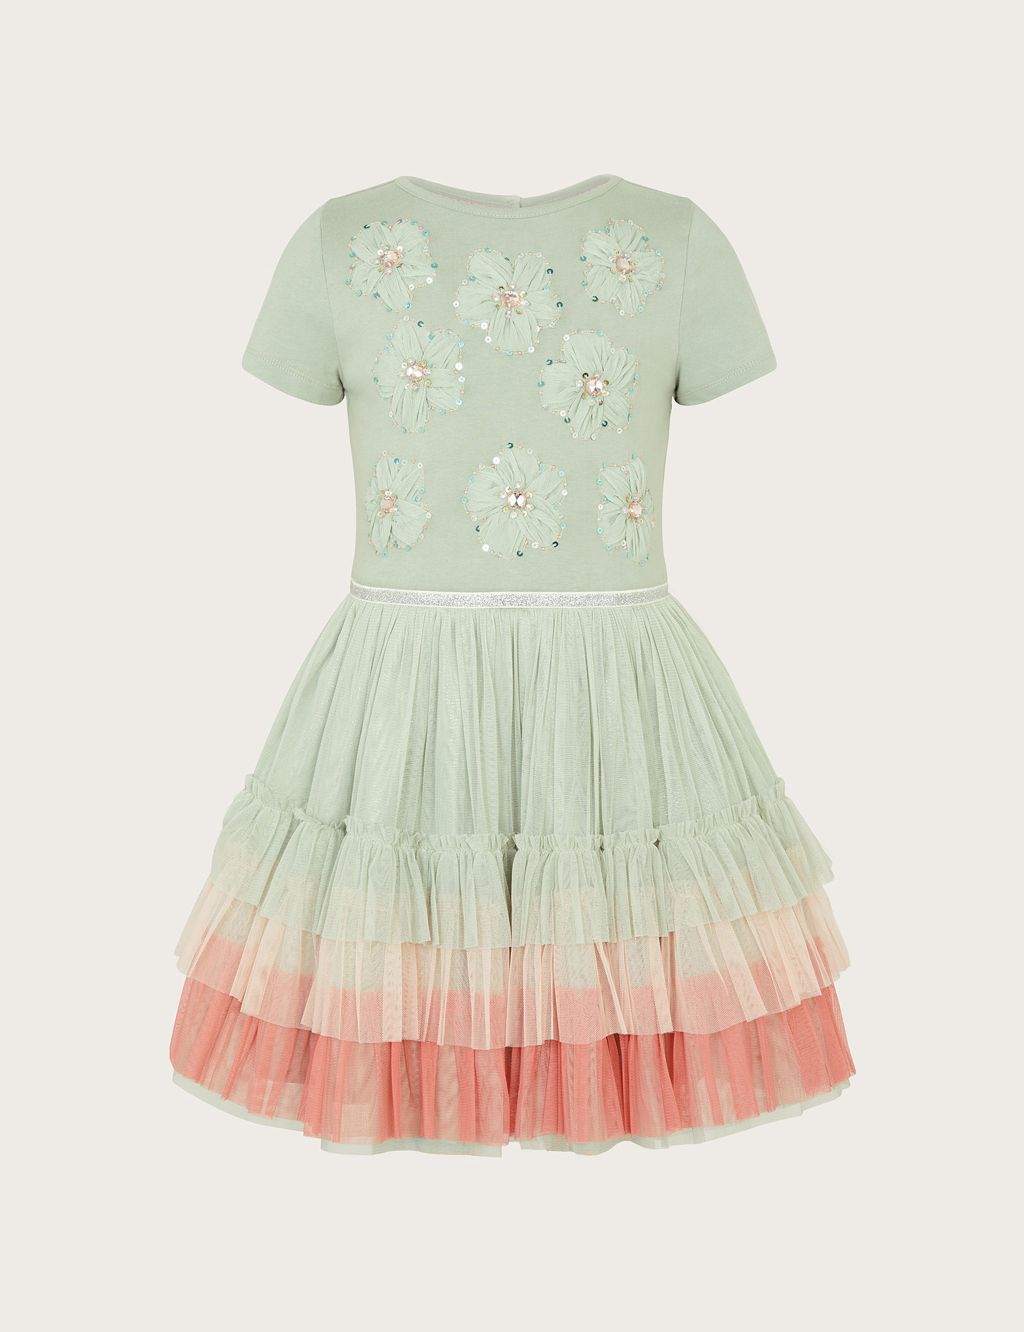 Sequin Floral Tiered Dress (3-13 Yrs) image 1